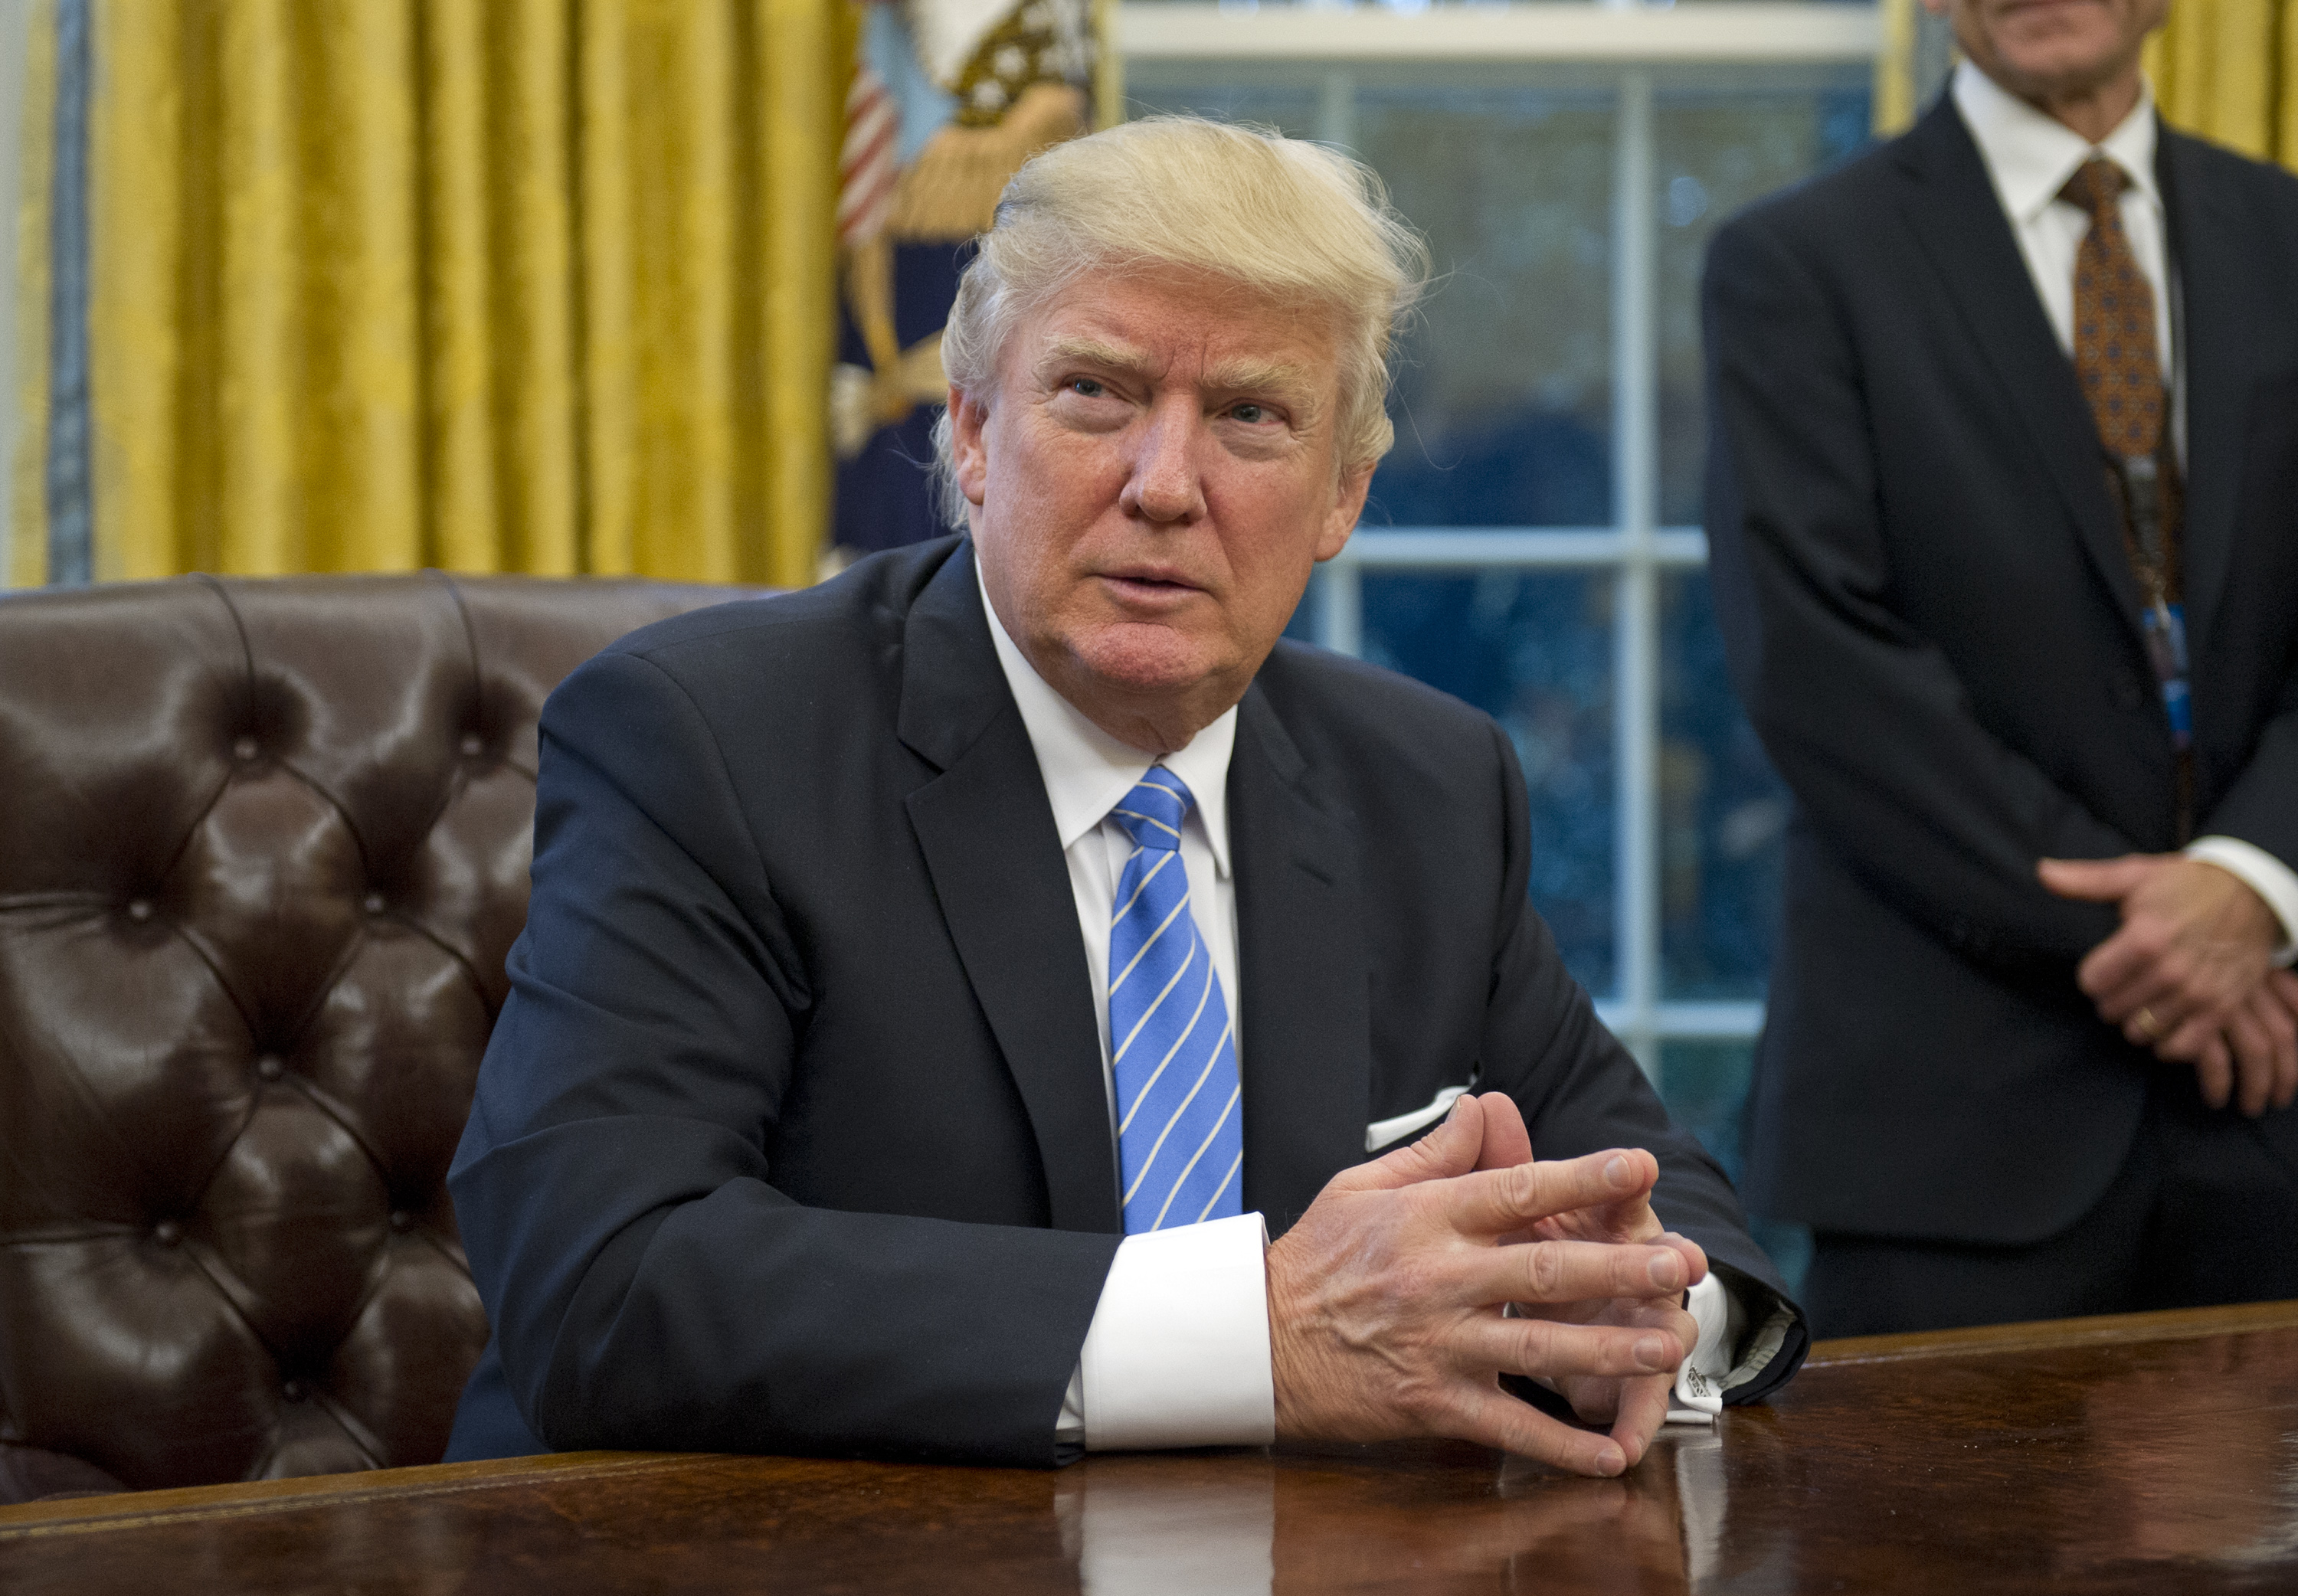 President Donald Trump in the Oval Office of the White House in Washington, D.C. on January 23, 2017. (Pool/Getty Images)